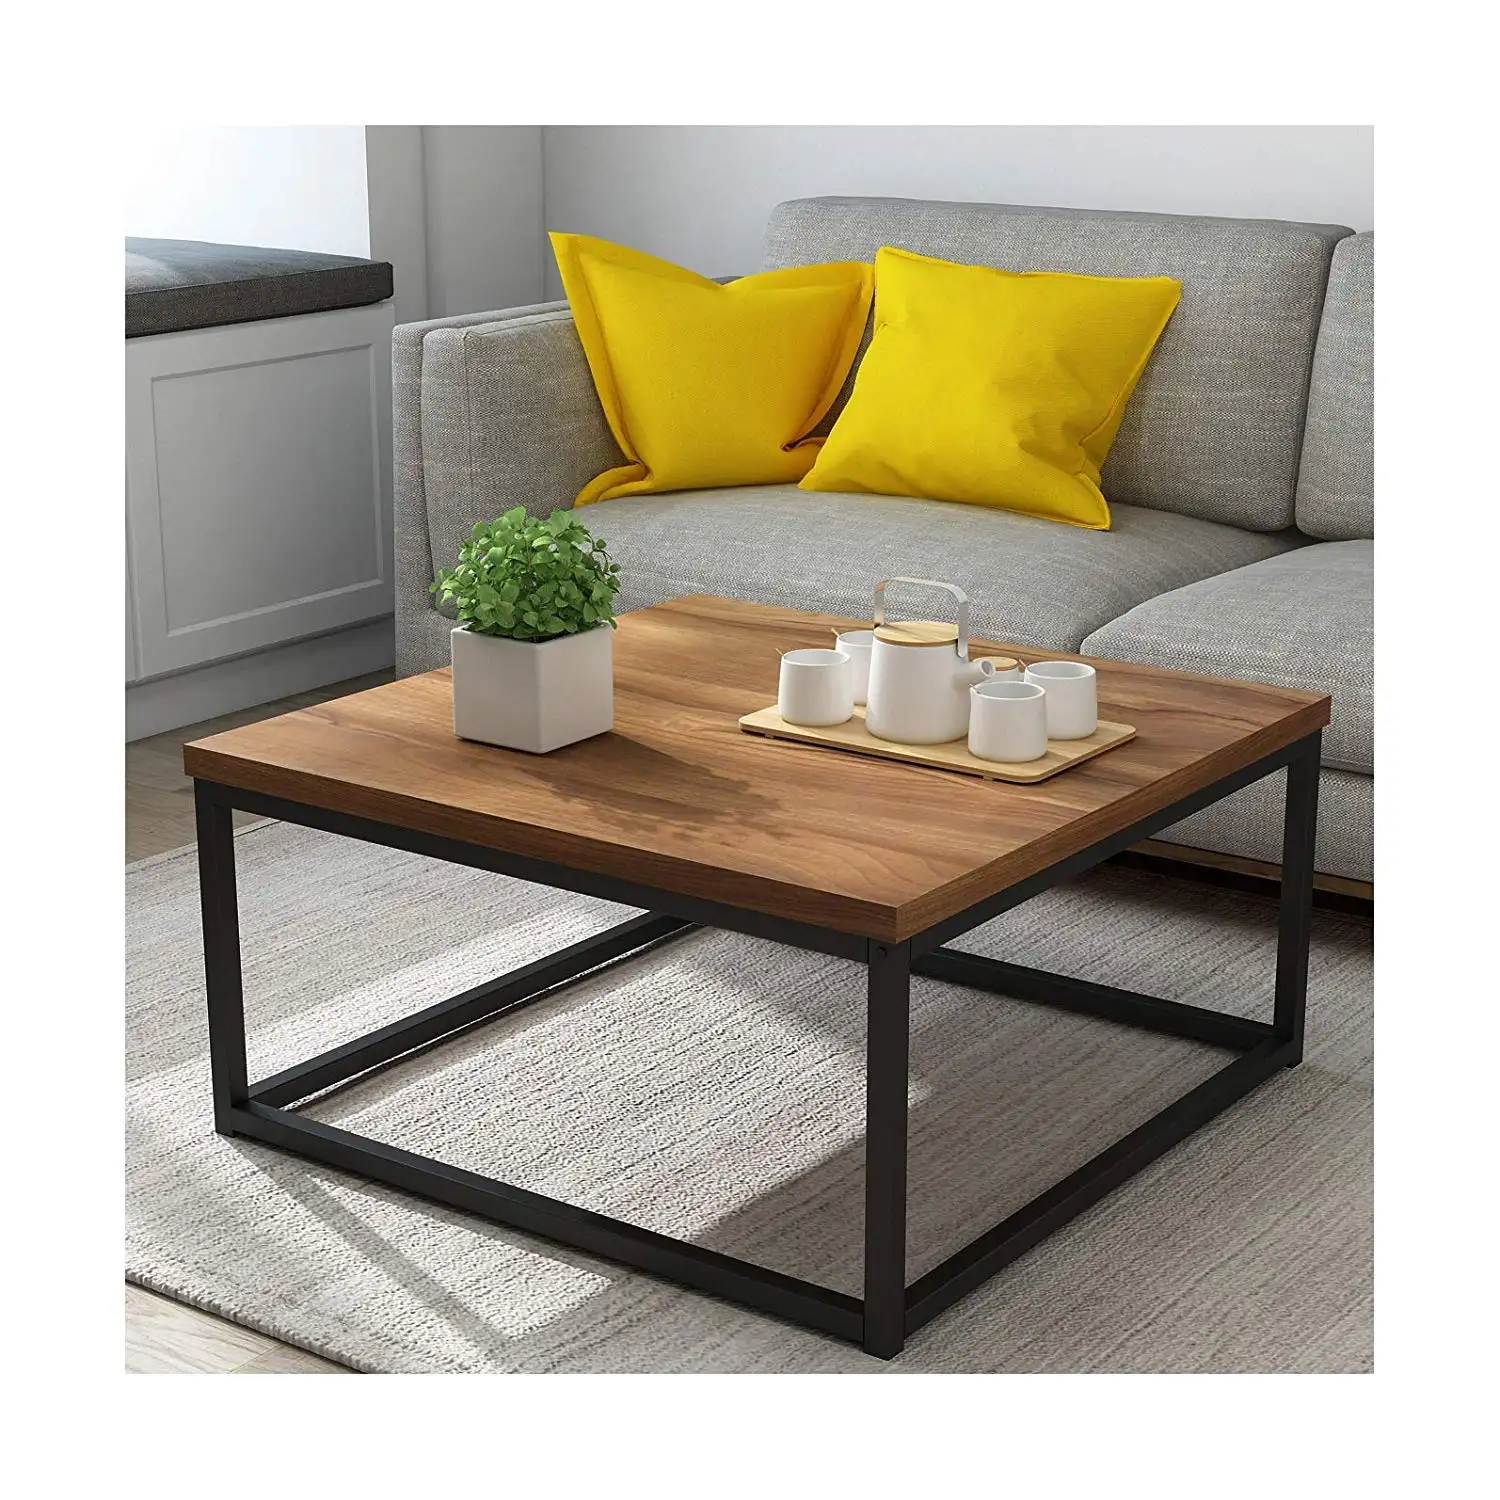 Latest Design Iron Frame Solid Wood Accent Coffee Tables for Living Room Furniture from Indian Supplier